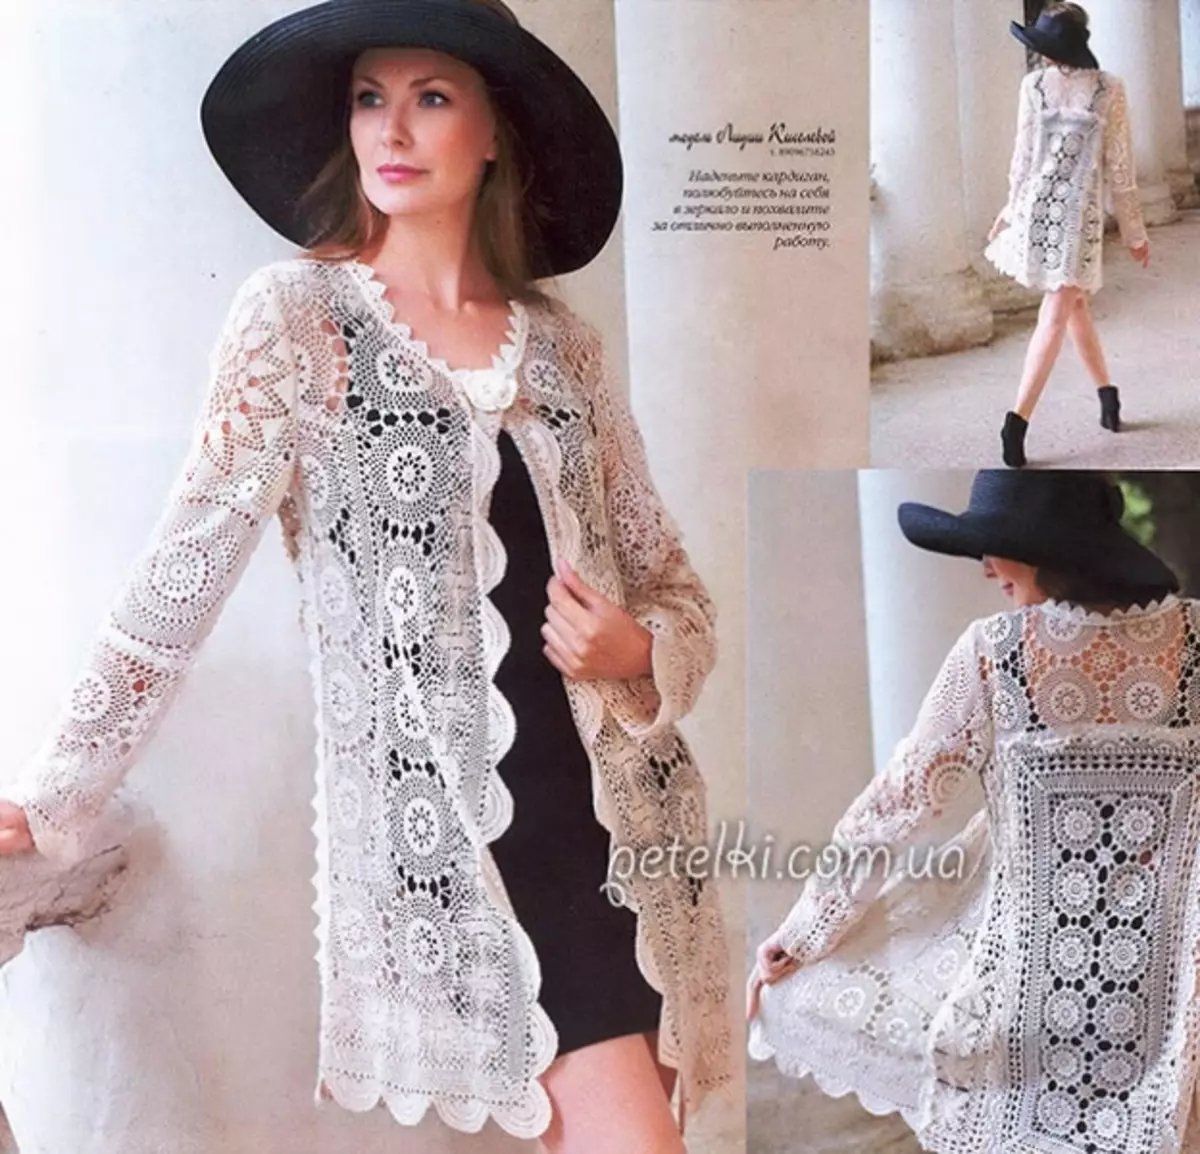 Openwork Cardigan Crochet from motifs: Schemes and descriptions with video